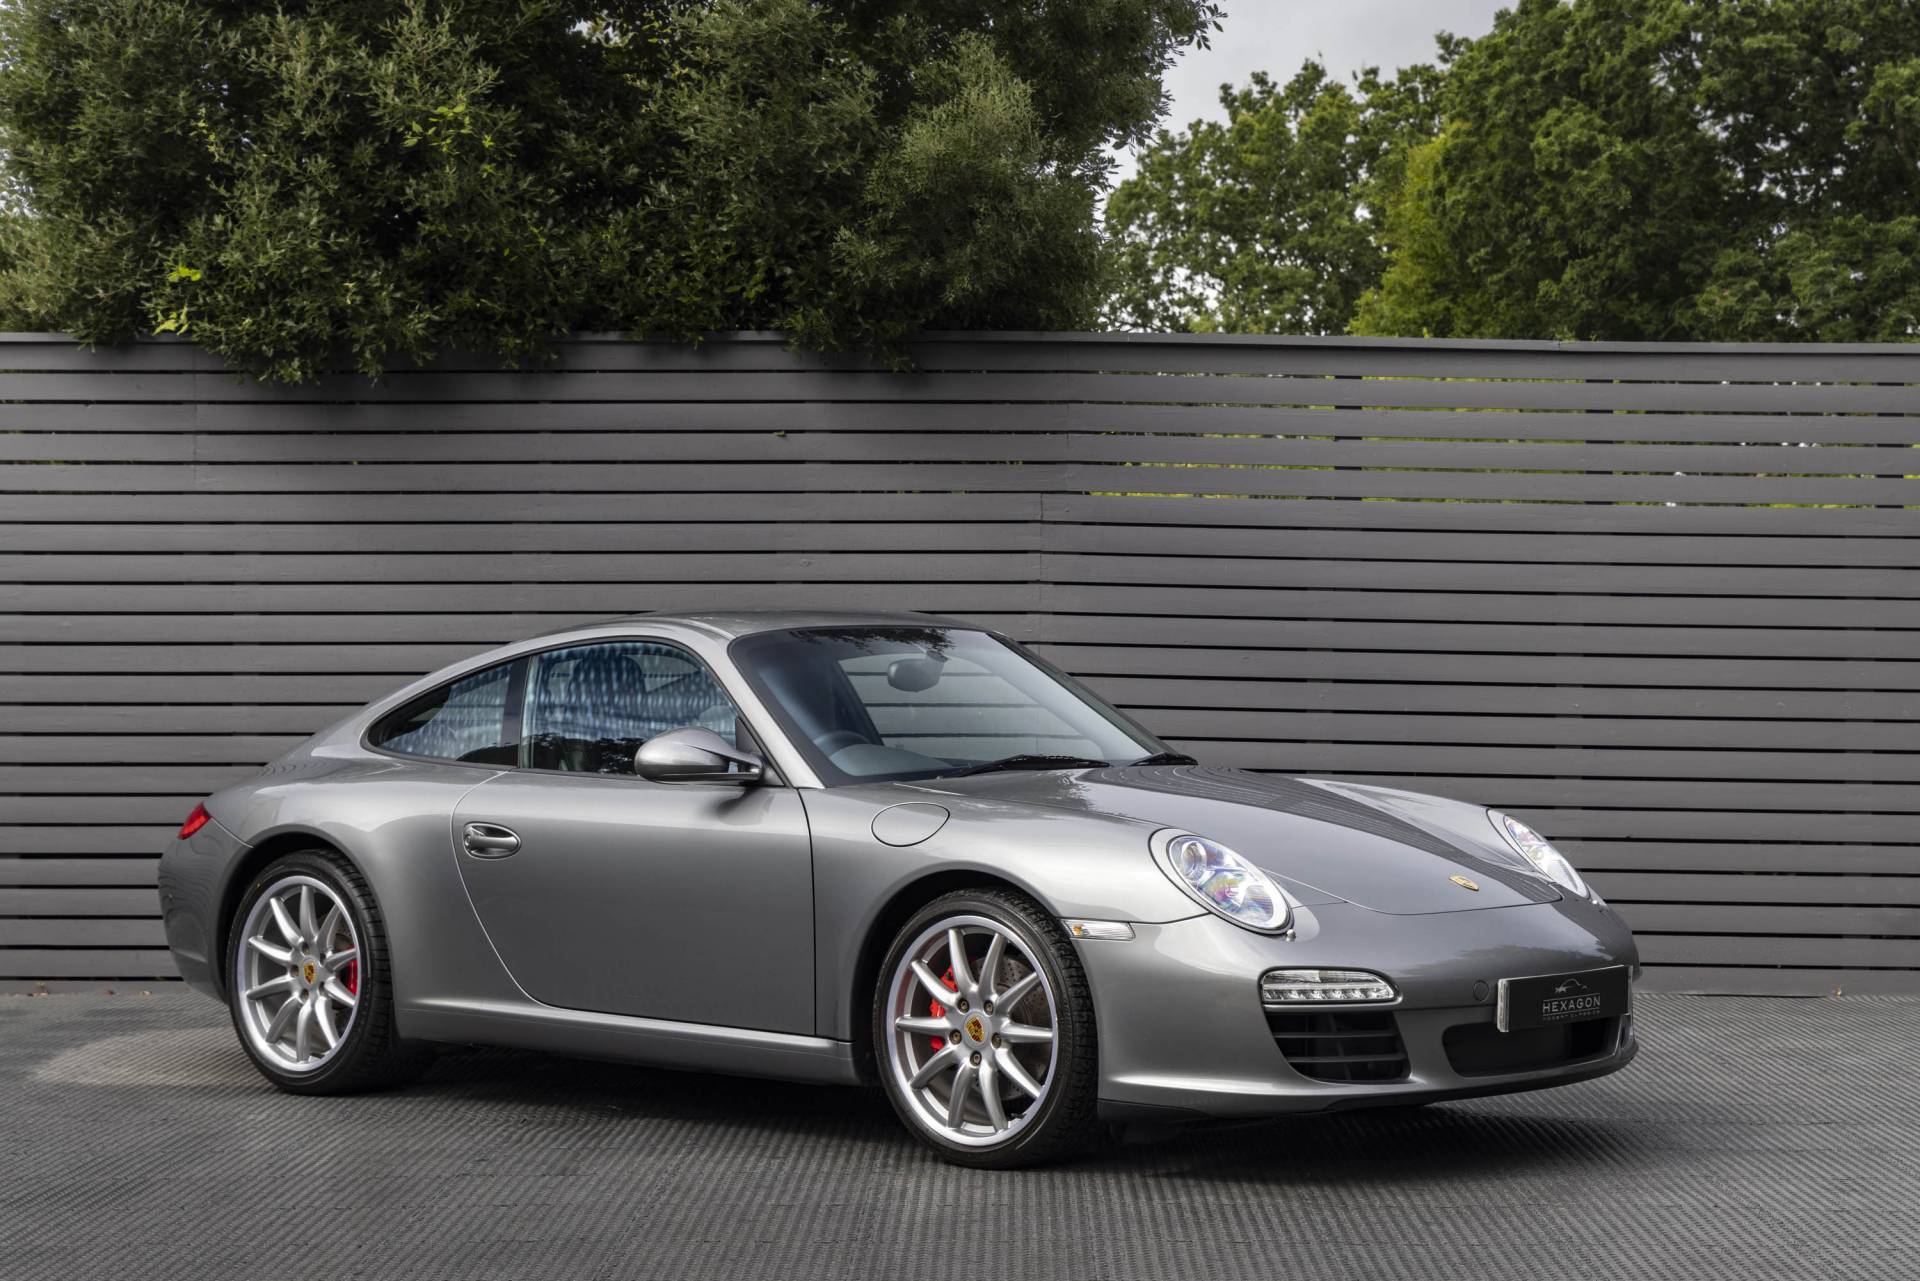 For Sale: Porsche 911 Carrera S (2009) offered for AUD 110,280